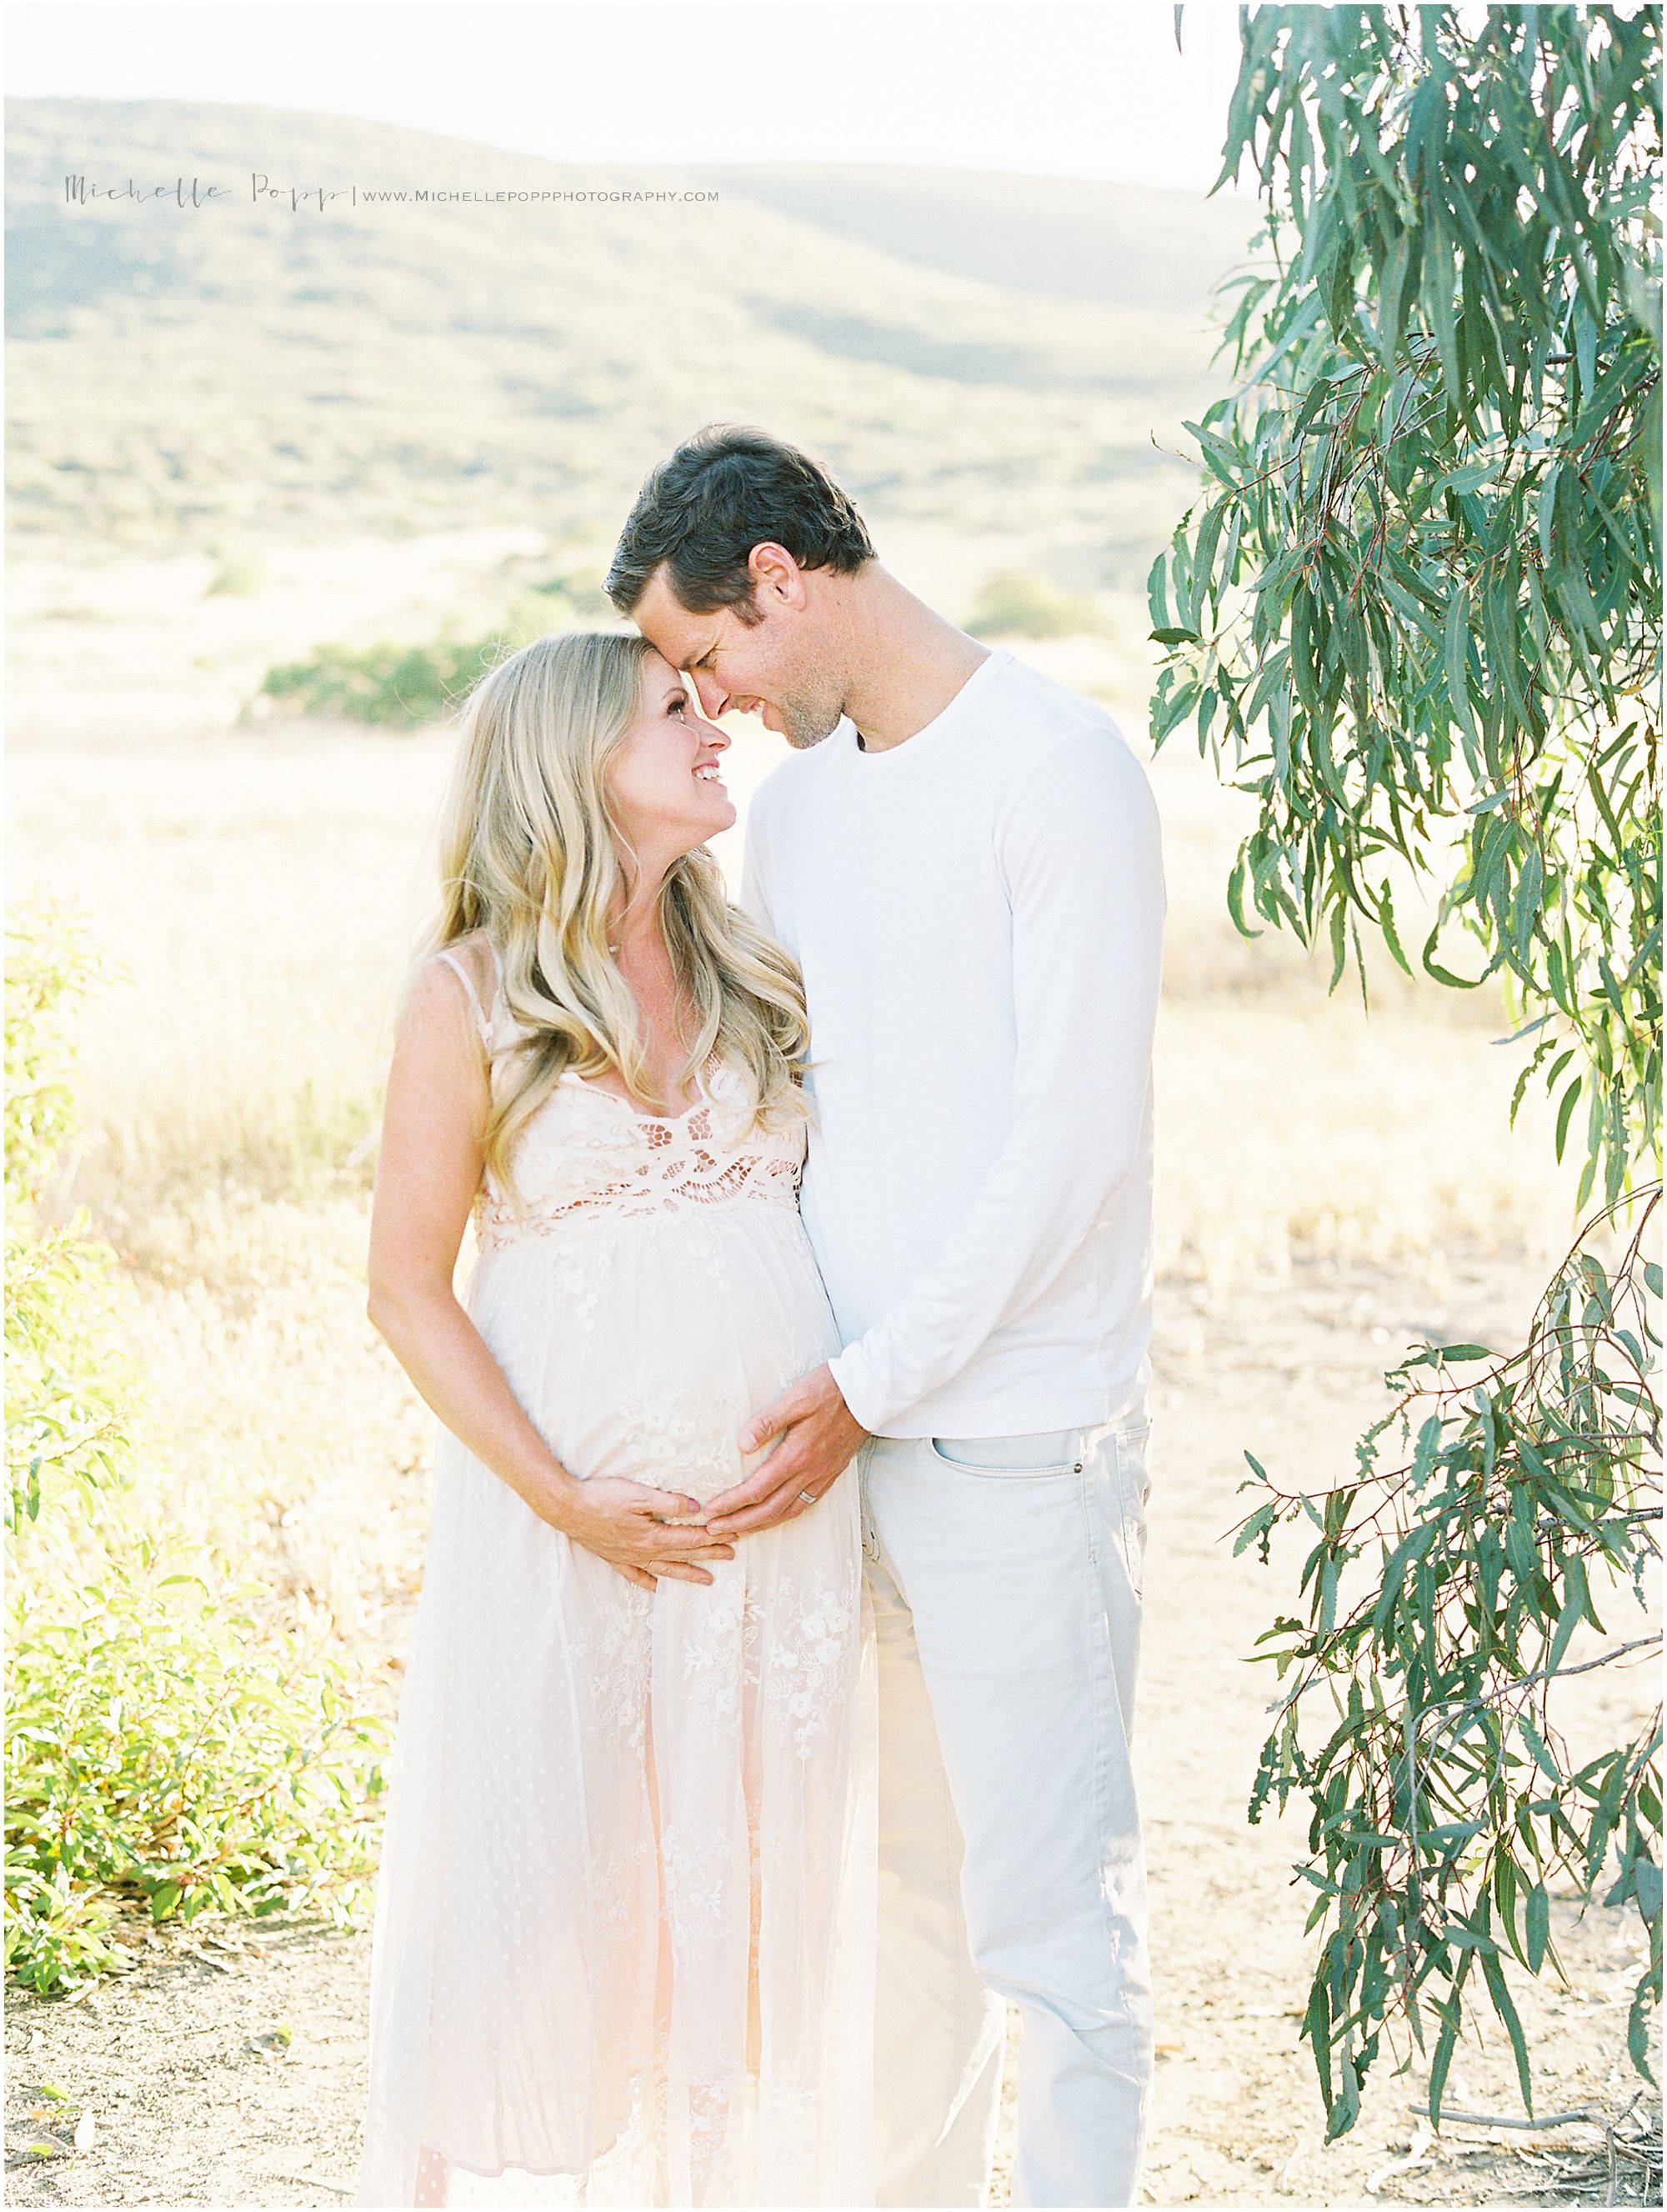 mom and dad soaking in moment in maternity photo